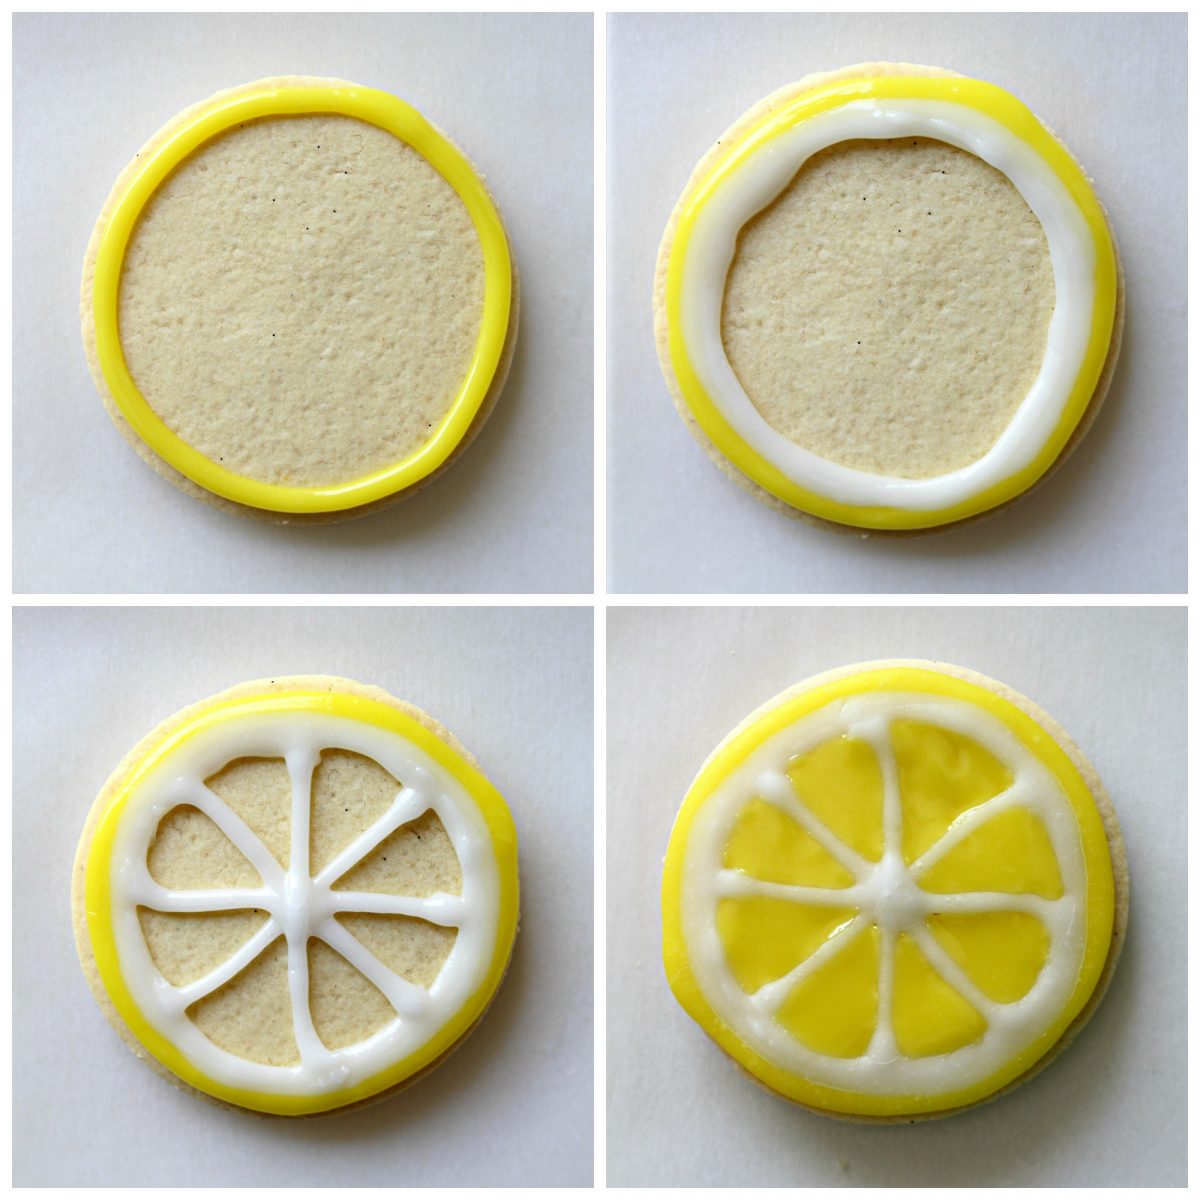 Icing Instructions: outline in yellow then white, white segment lines, fill in with yellow icing.